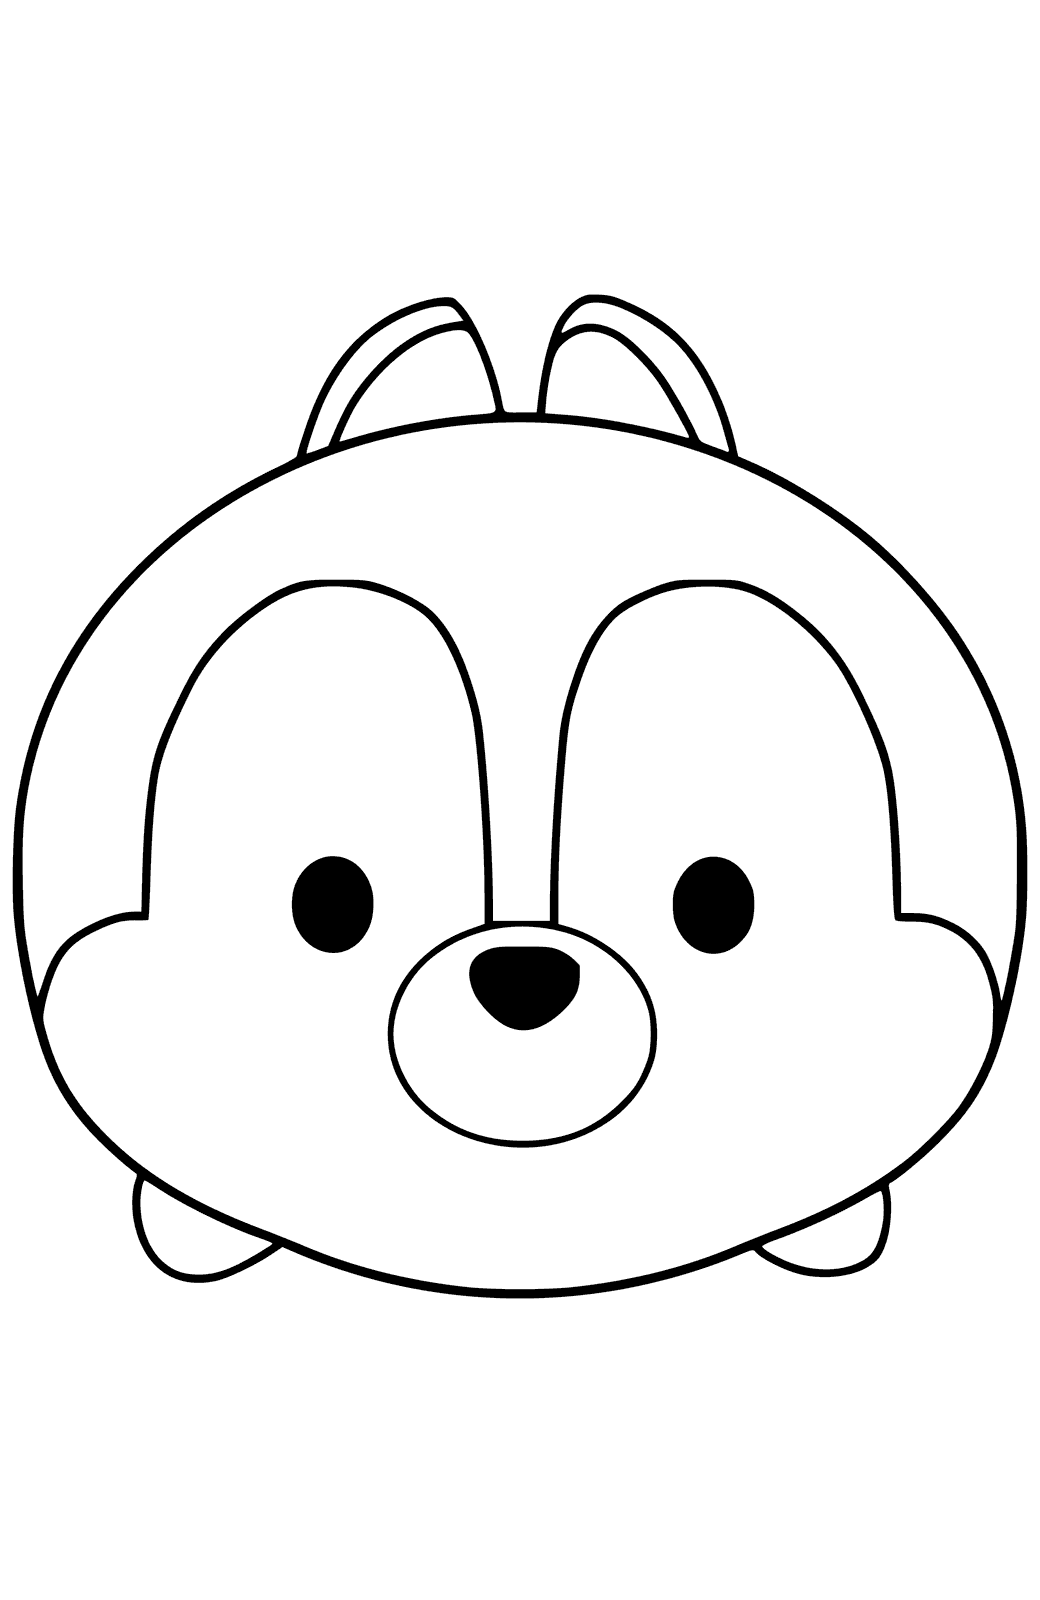 Tsum Tsum Chip Coloring Pages   Coloring Cool